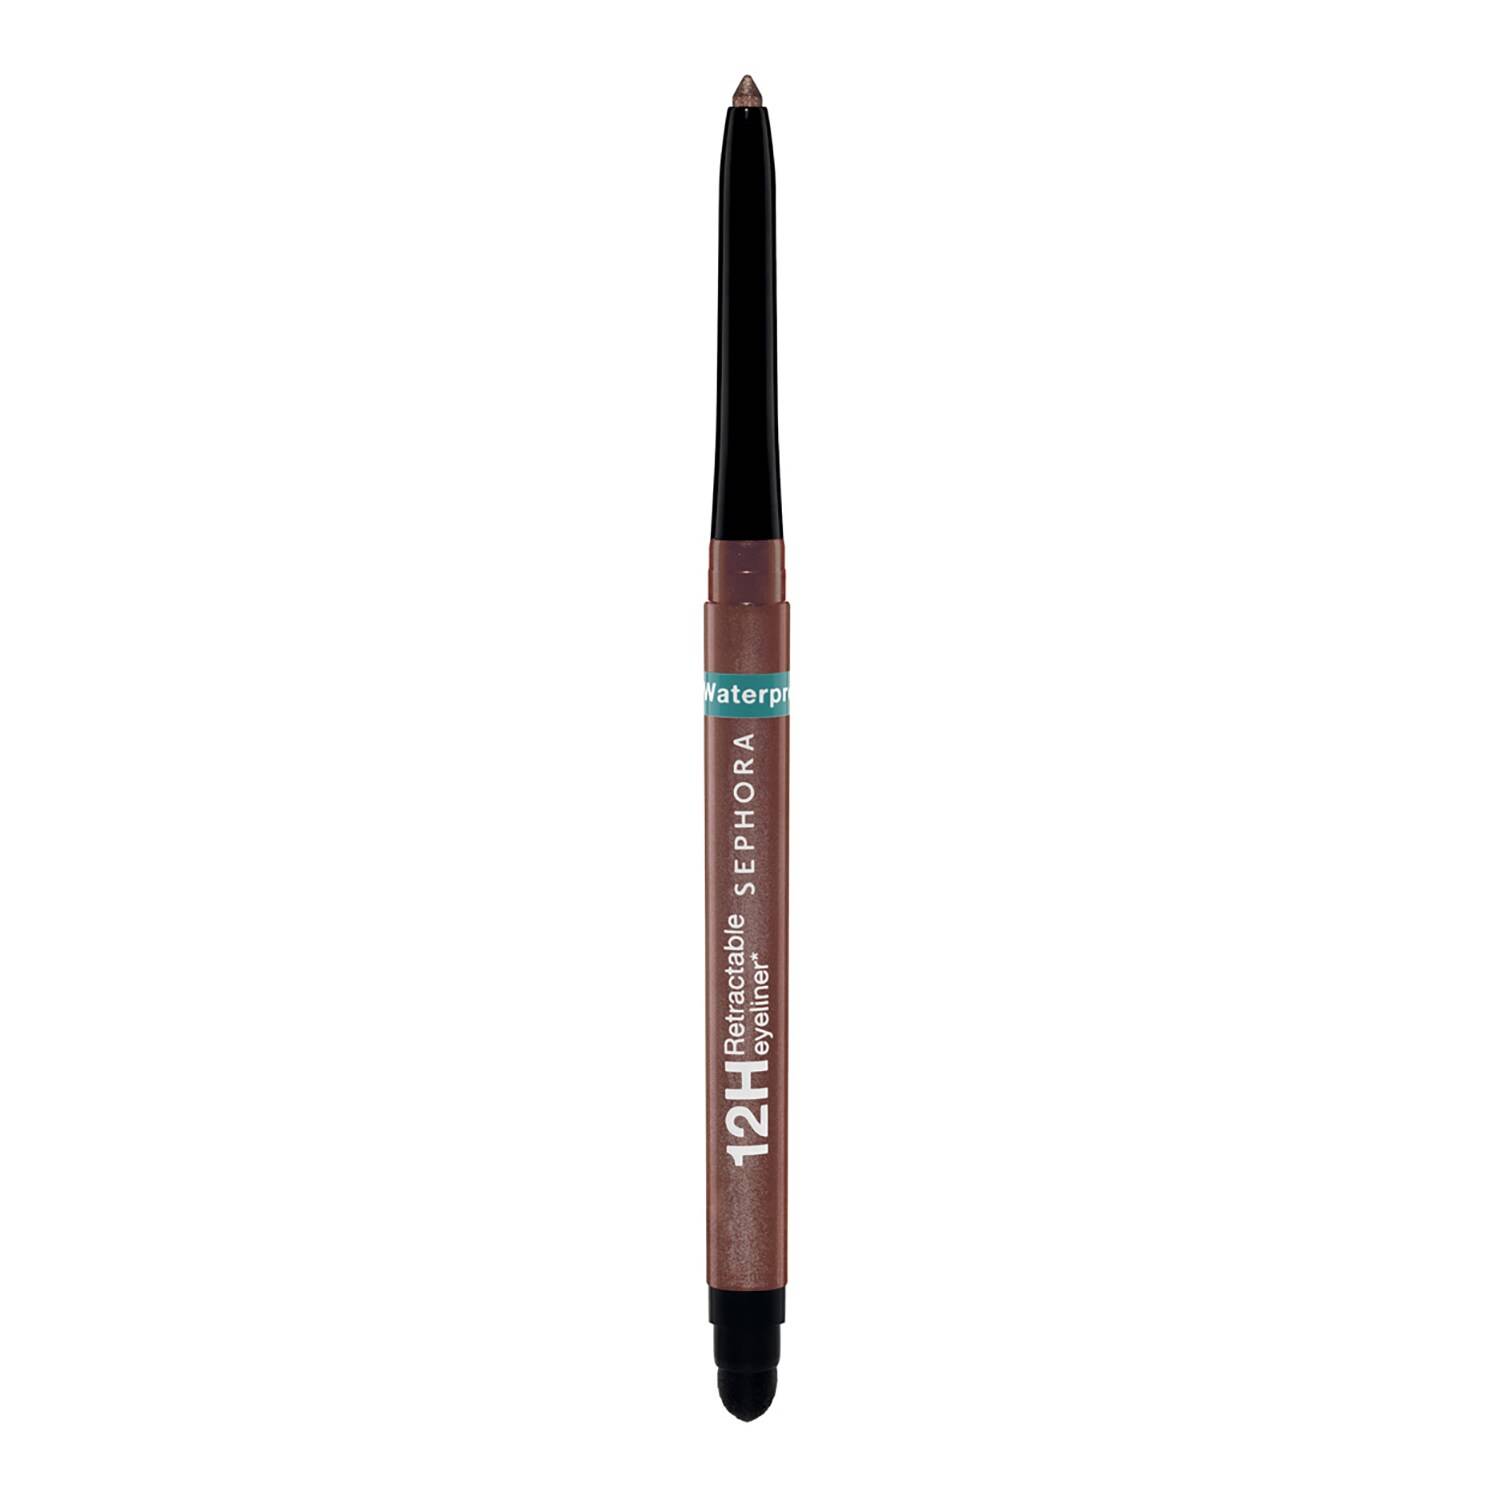 Sephora Collection Waterproof 12H Retractable Eyeliner Pencil 0.3G 26 Shimmer Taupe